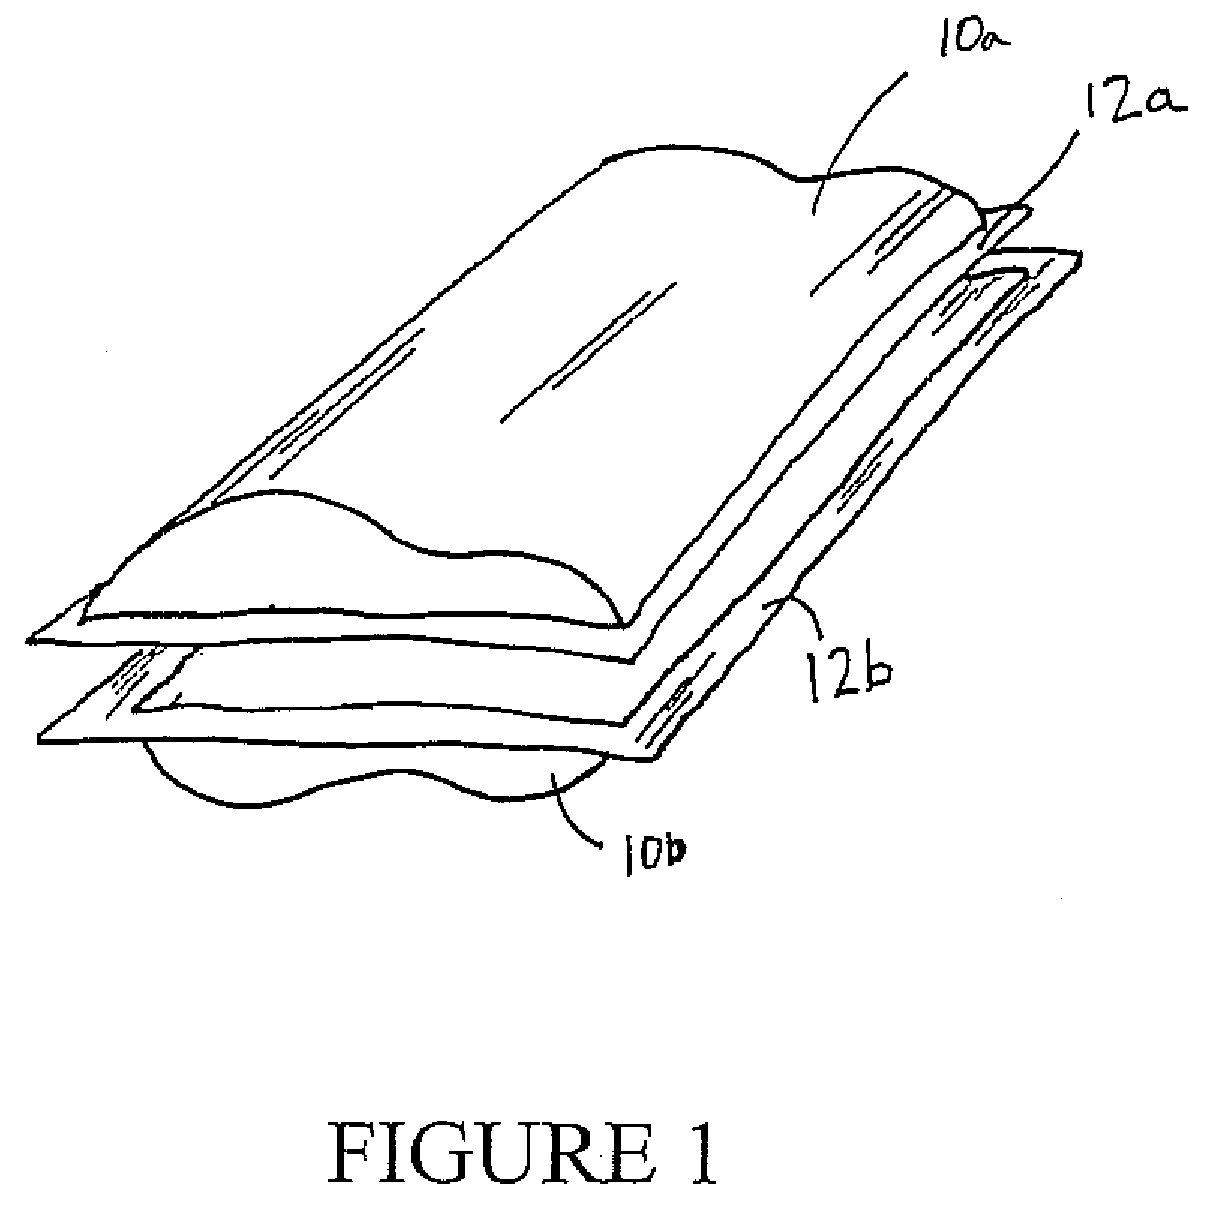 System and method for welding and real time monitoring of seam welded parts